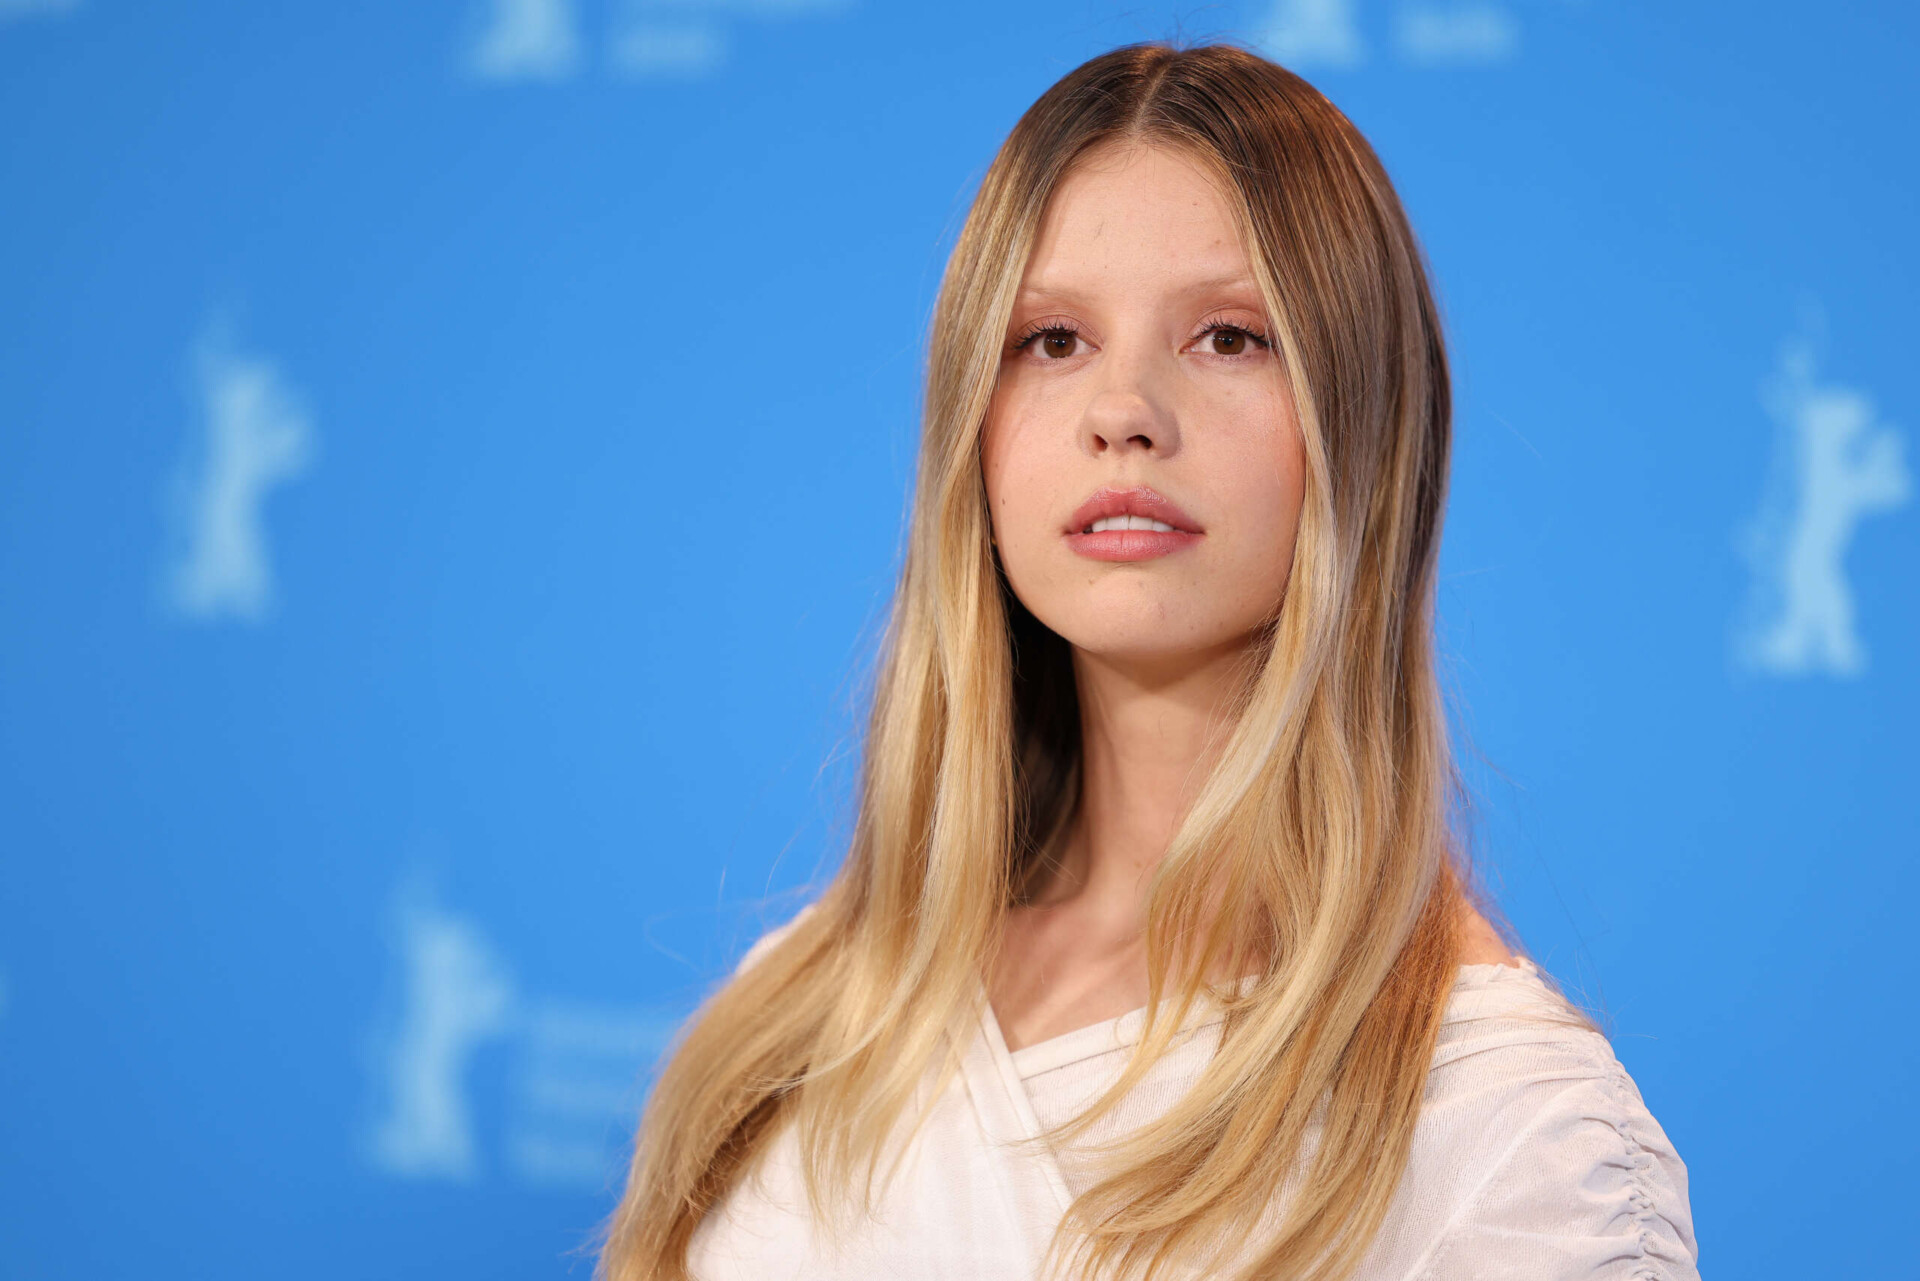 Mia Goth poses at the "Infinity Pool" photocall during the 73rd Berlinale International Film Festival Berlin at Grand Hyatt Hotel on February 22, 2023 in Berlin, Germany